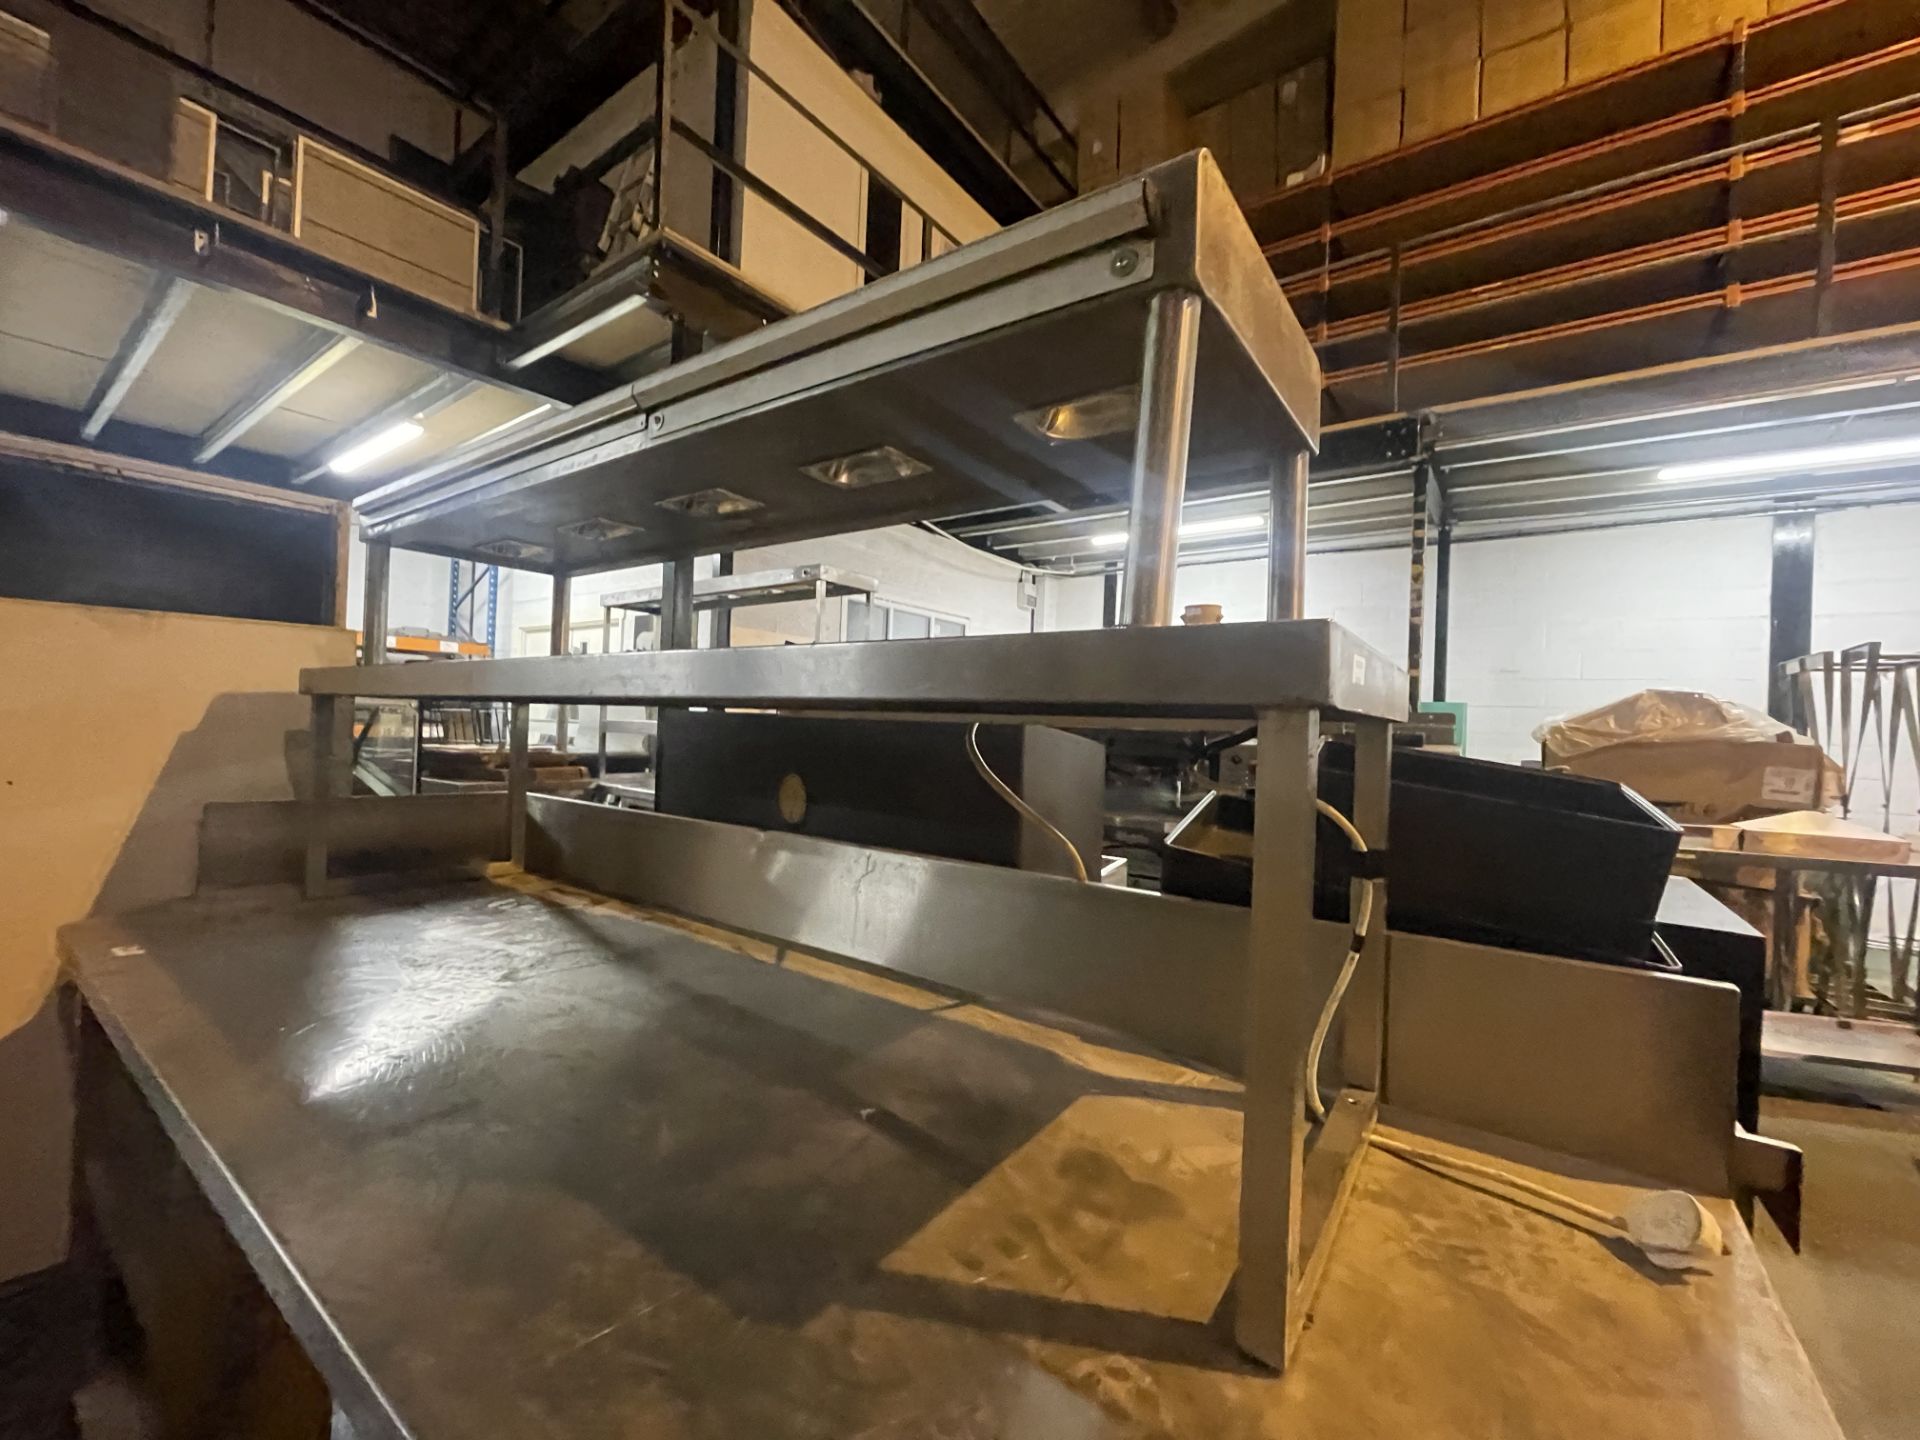 1 x Two Tier Countertop Heated Gantry Passthrough Shelf With Ticket Rails - Image 3 of 6